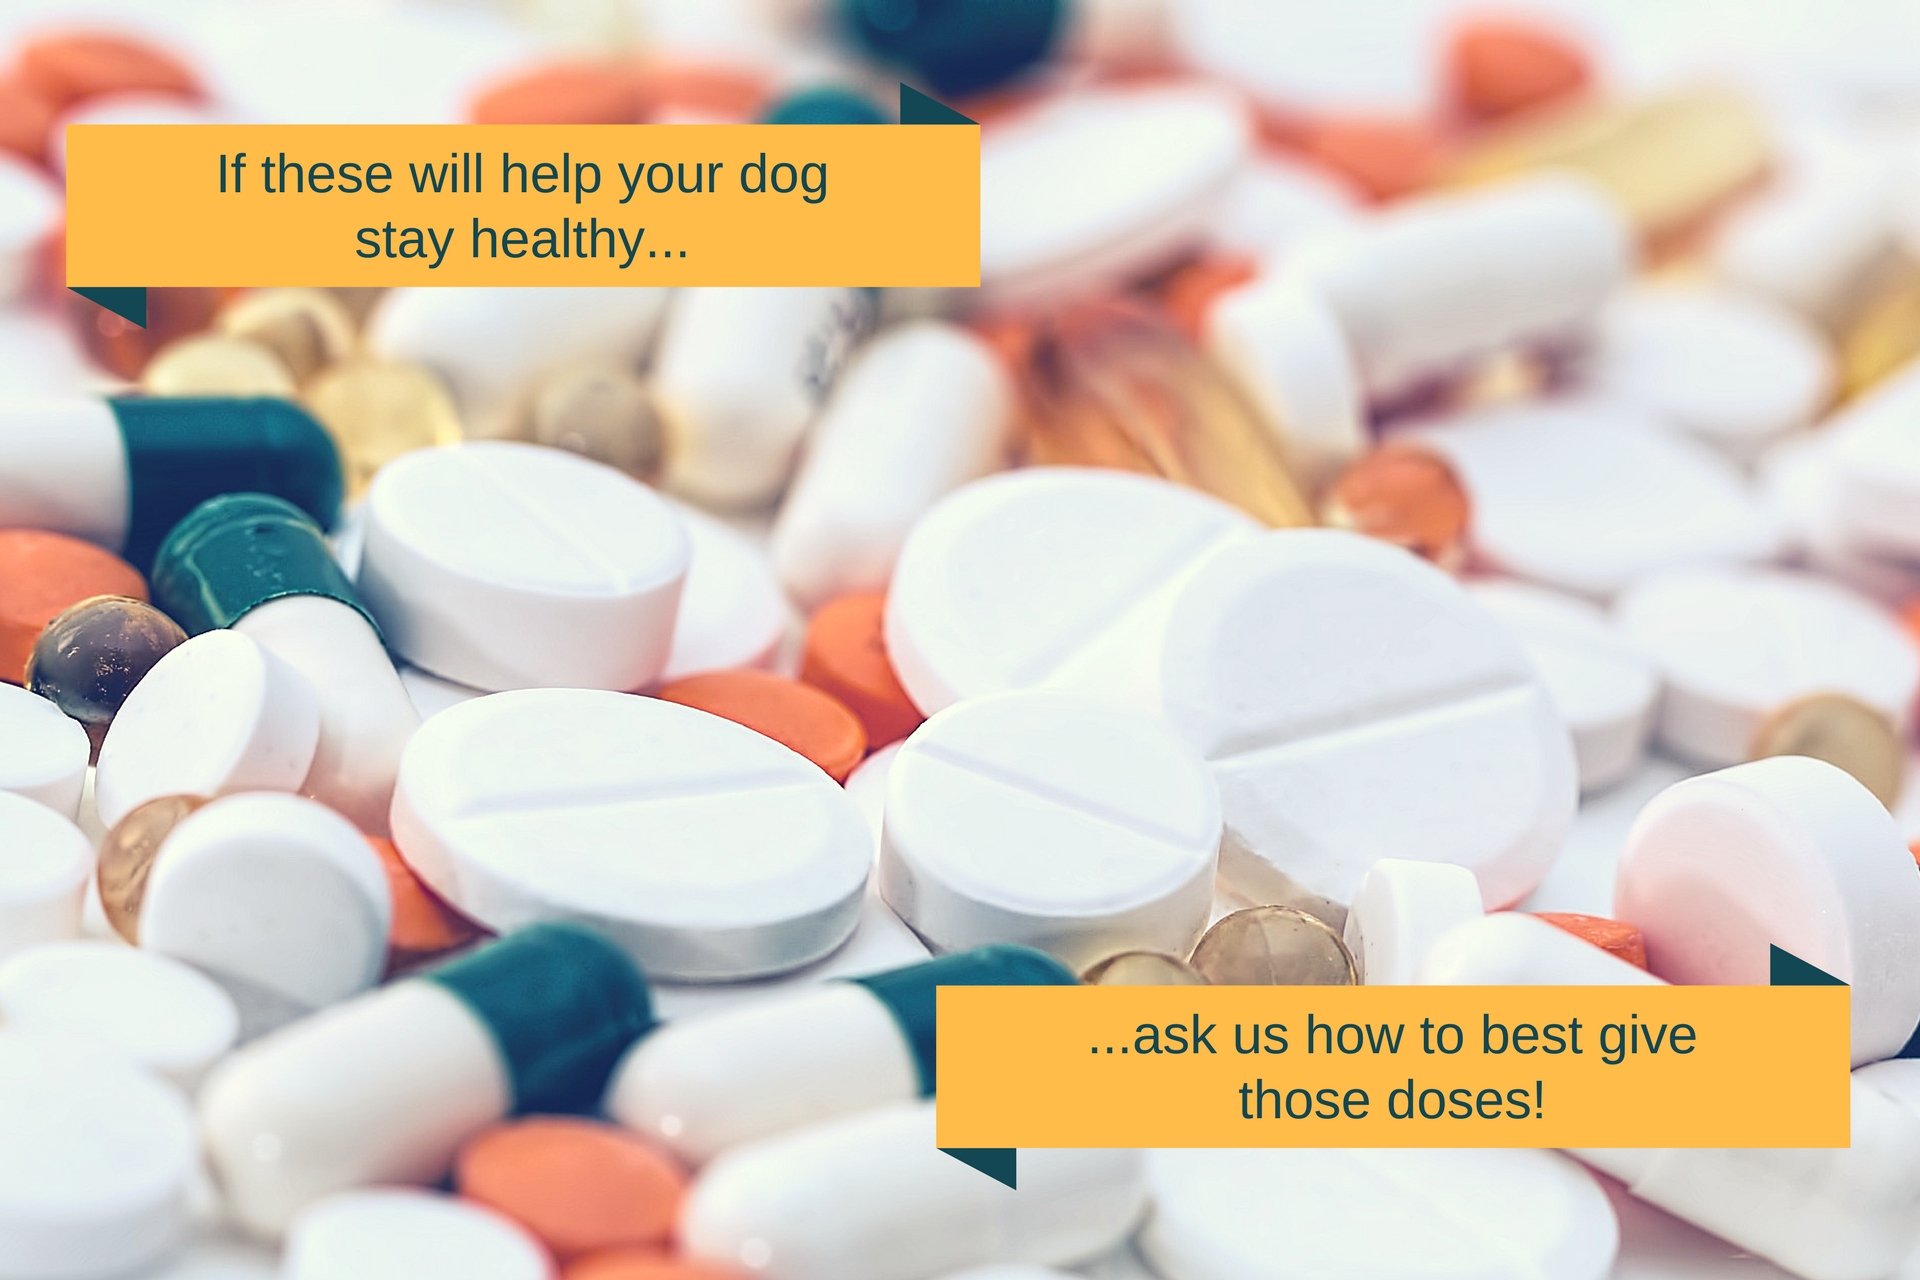 We want your dog to stay healthy, so feel free to ask us if you need help giving that medicine!